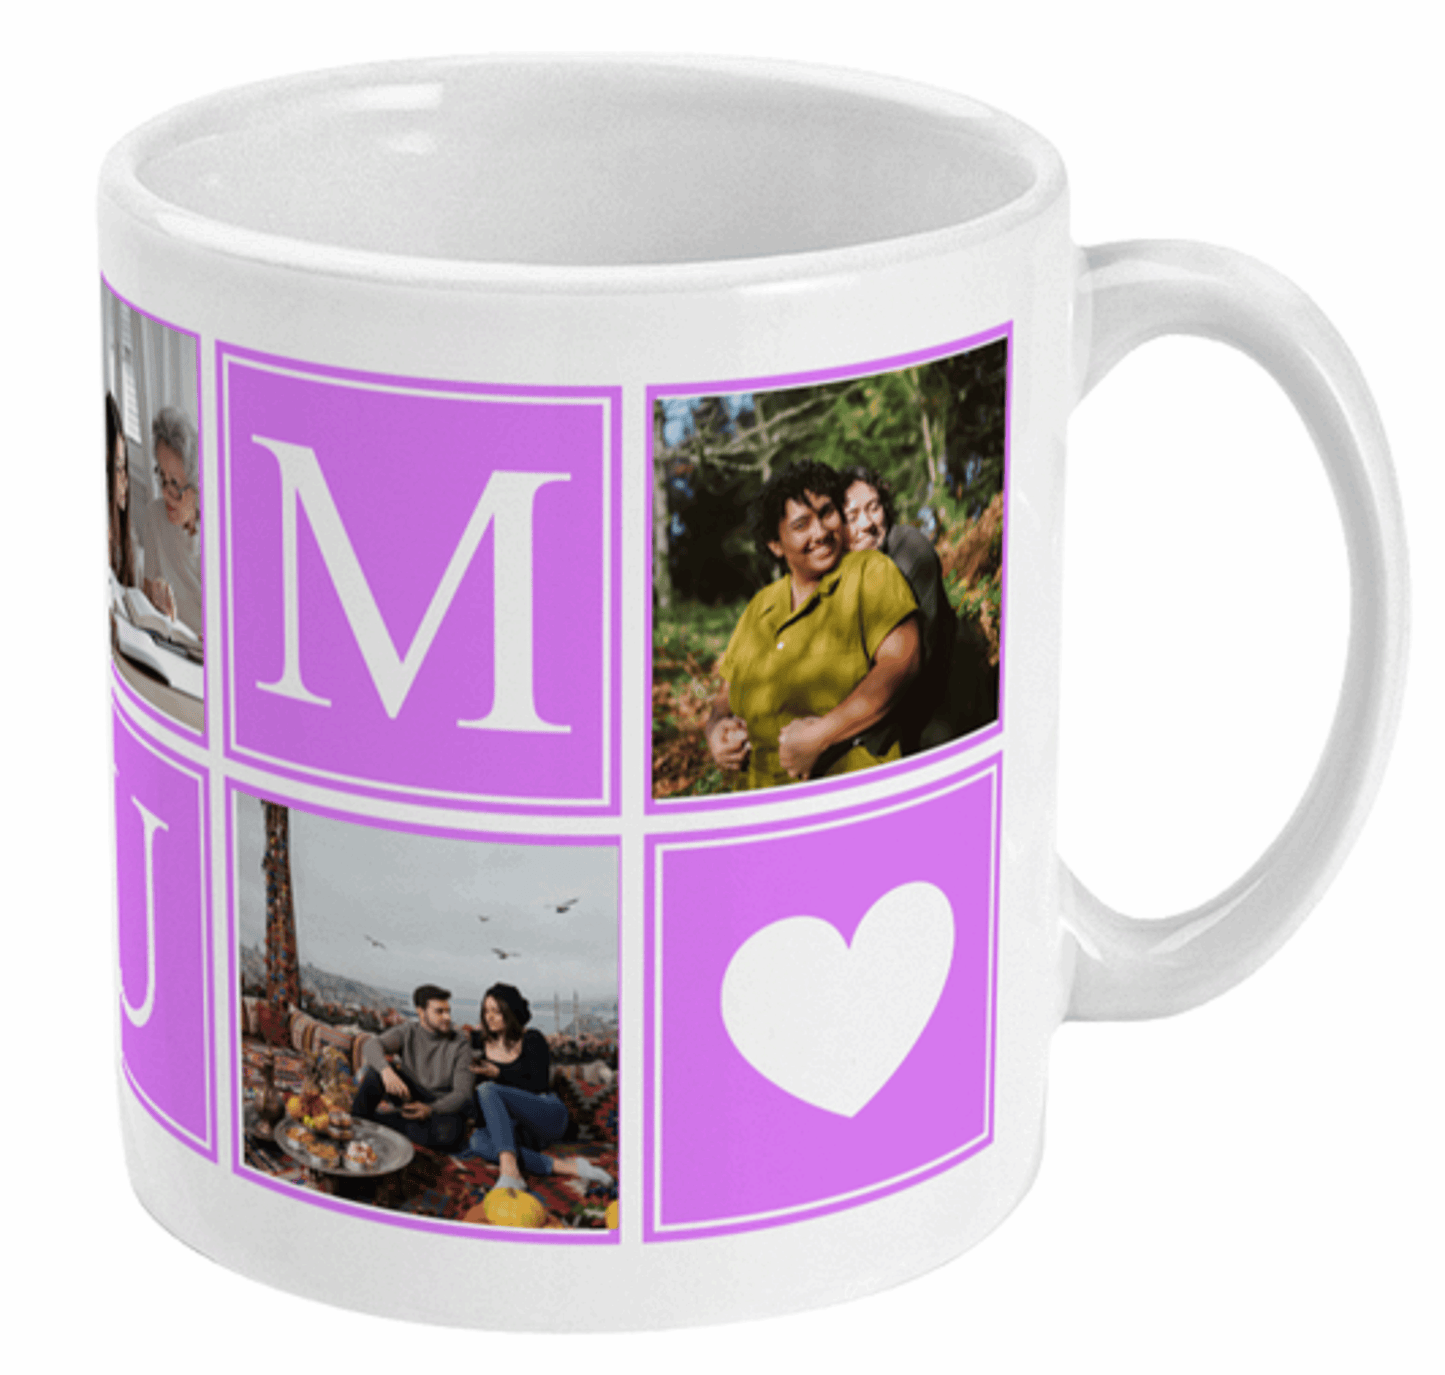  Mum Photo Mug with 5 of your photos by Free Spirit Accessories sold by Free Spirit Accessories